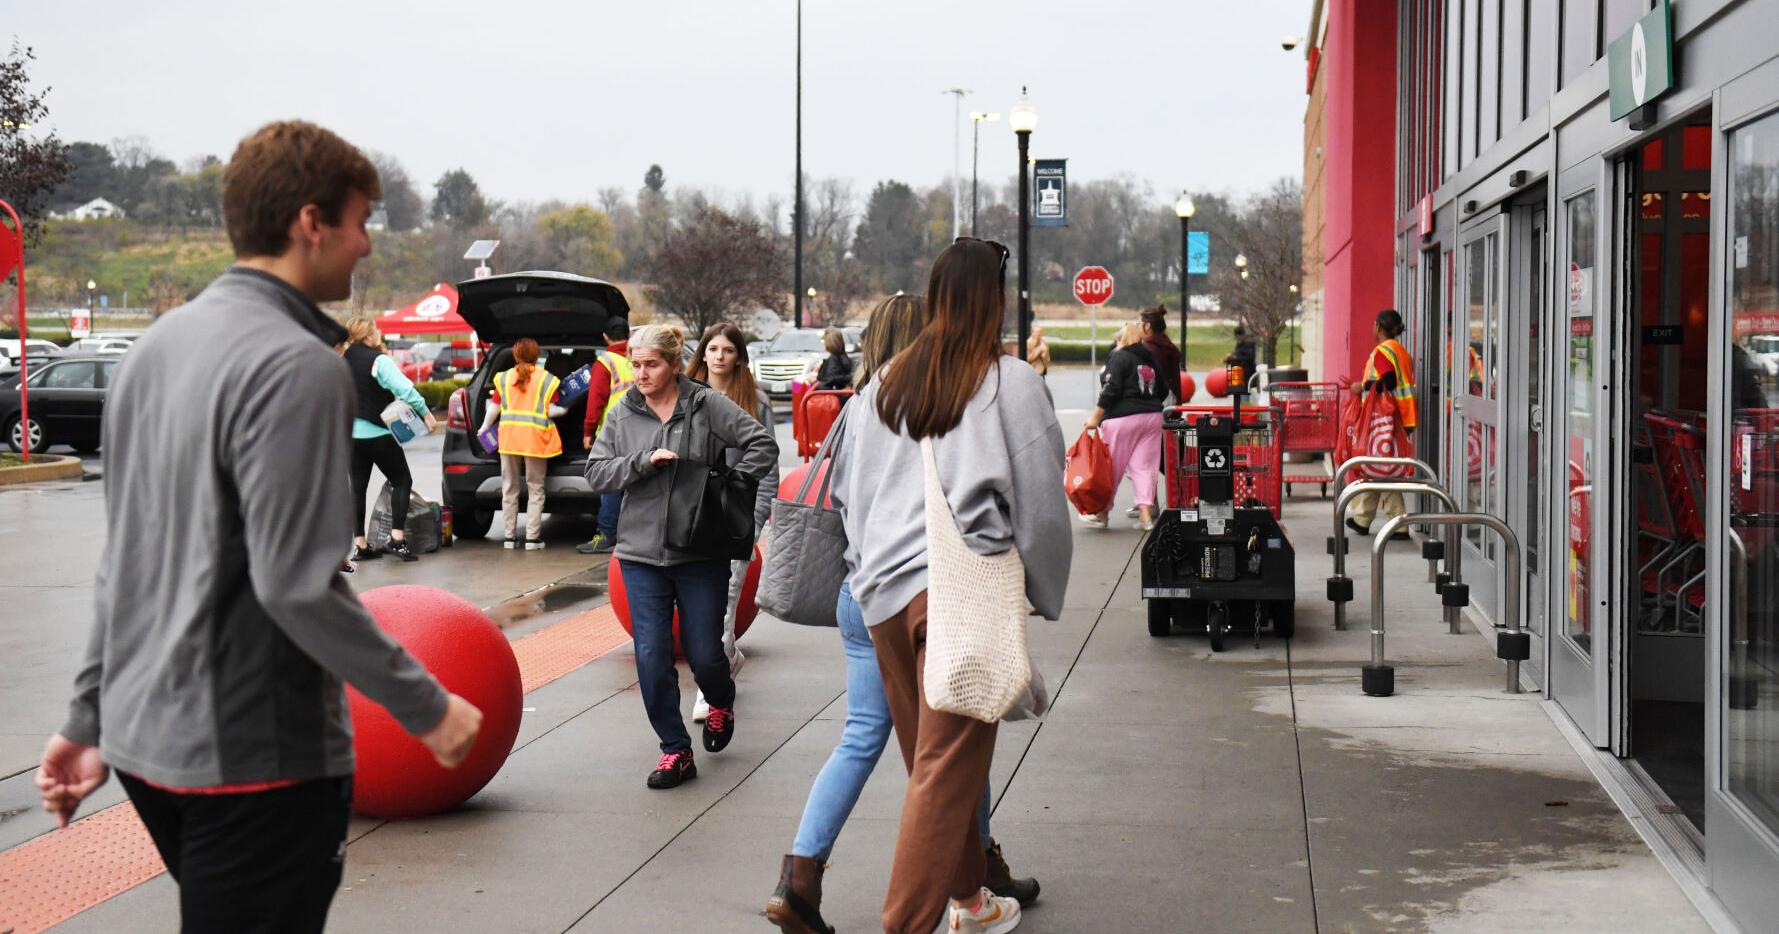 Lancaster County shoppers flock to stores on Black Friday [photos]